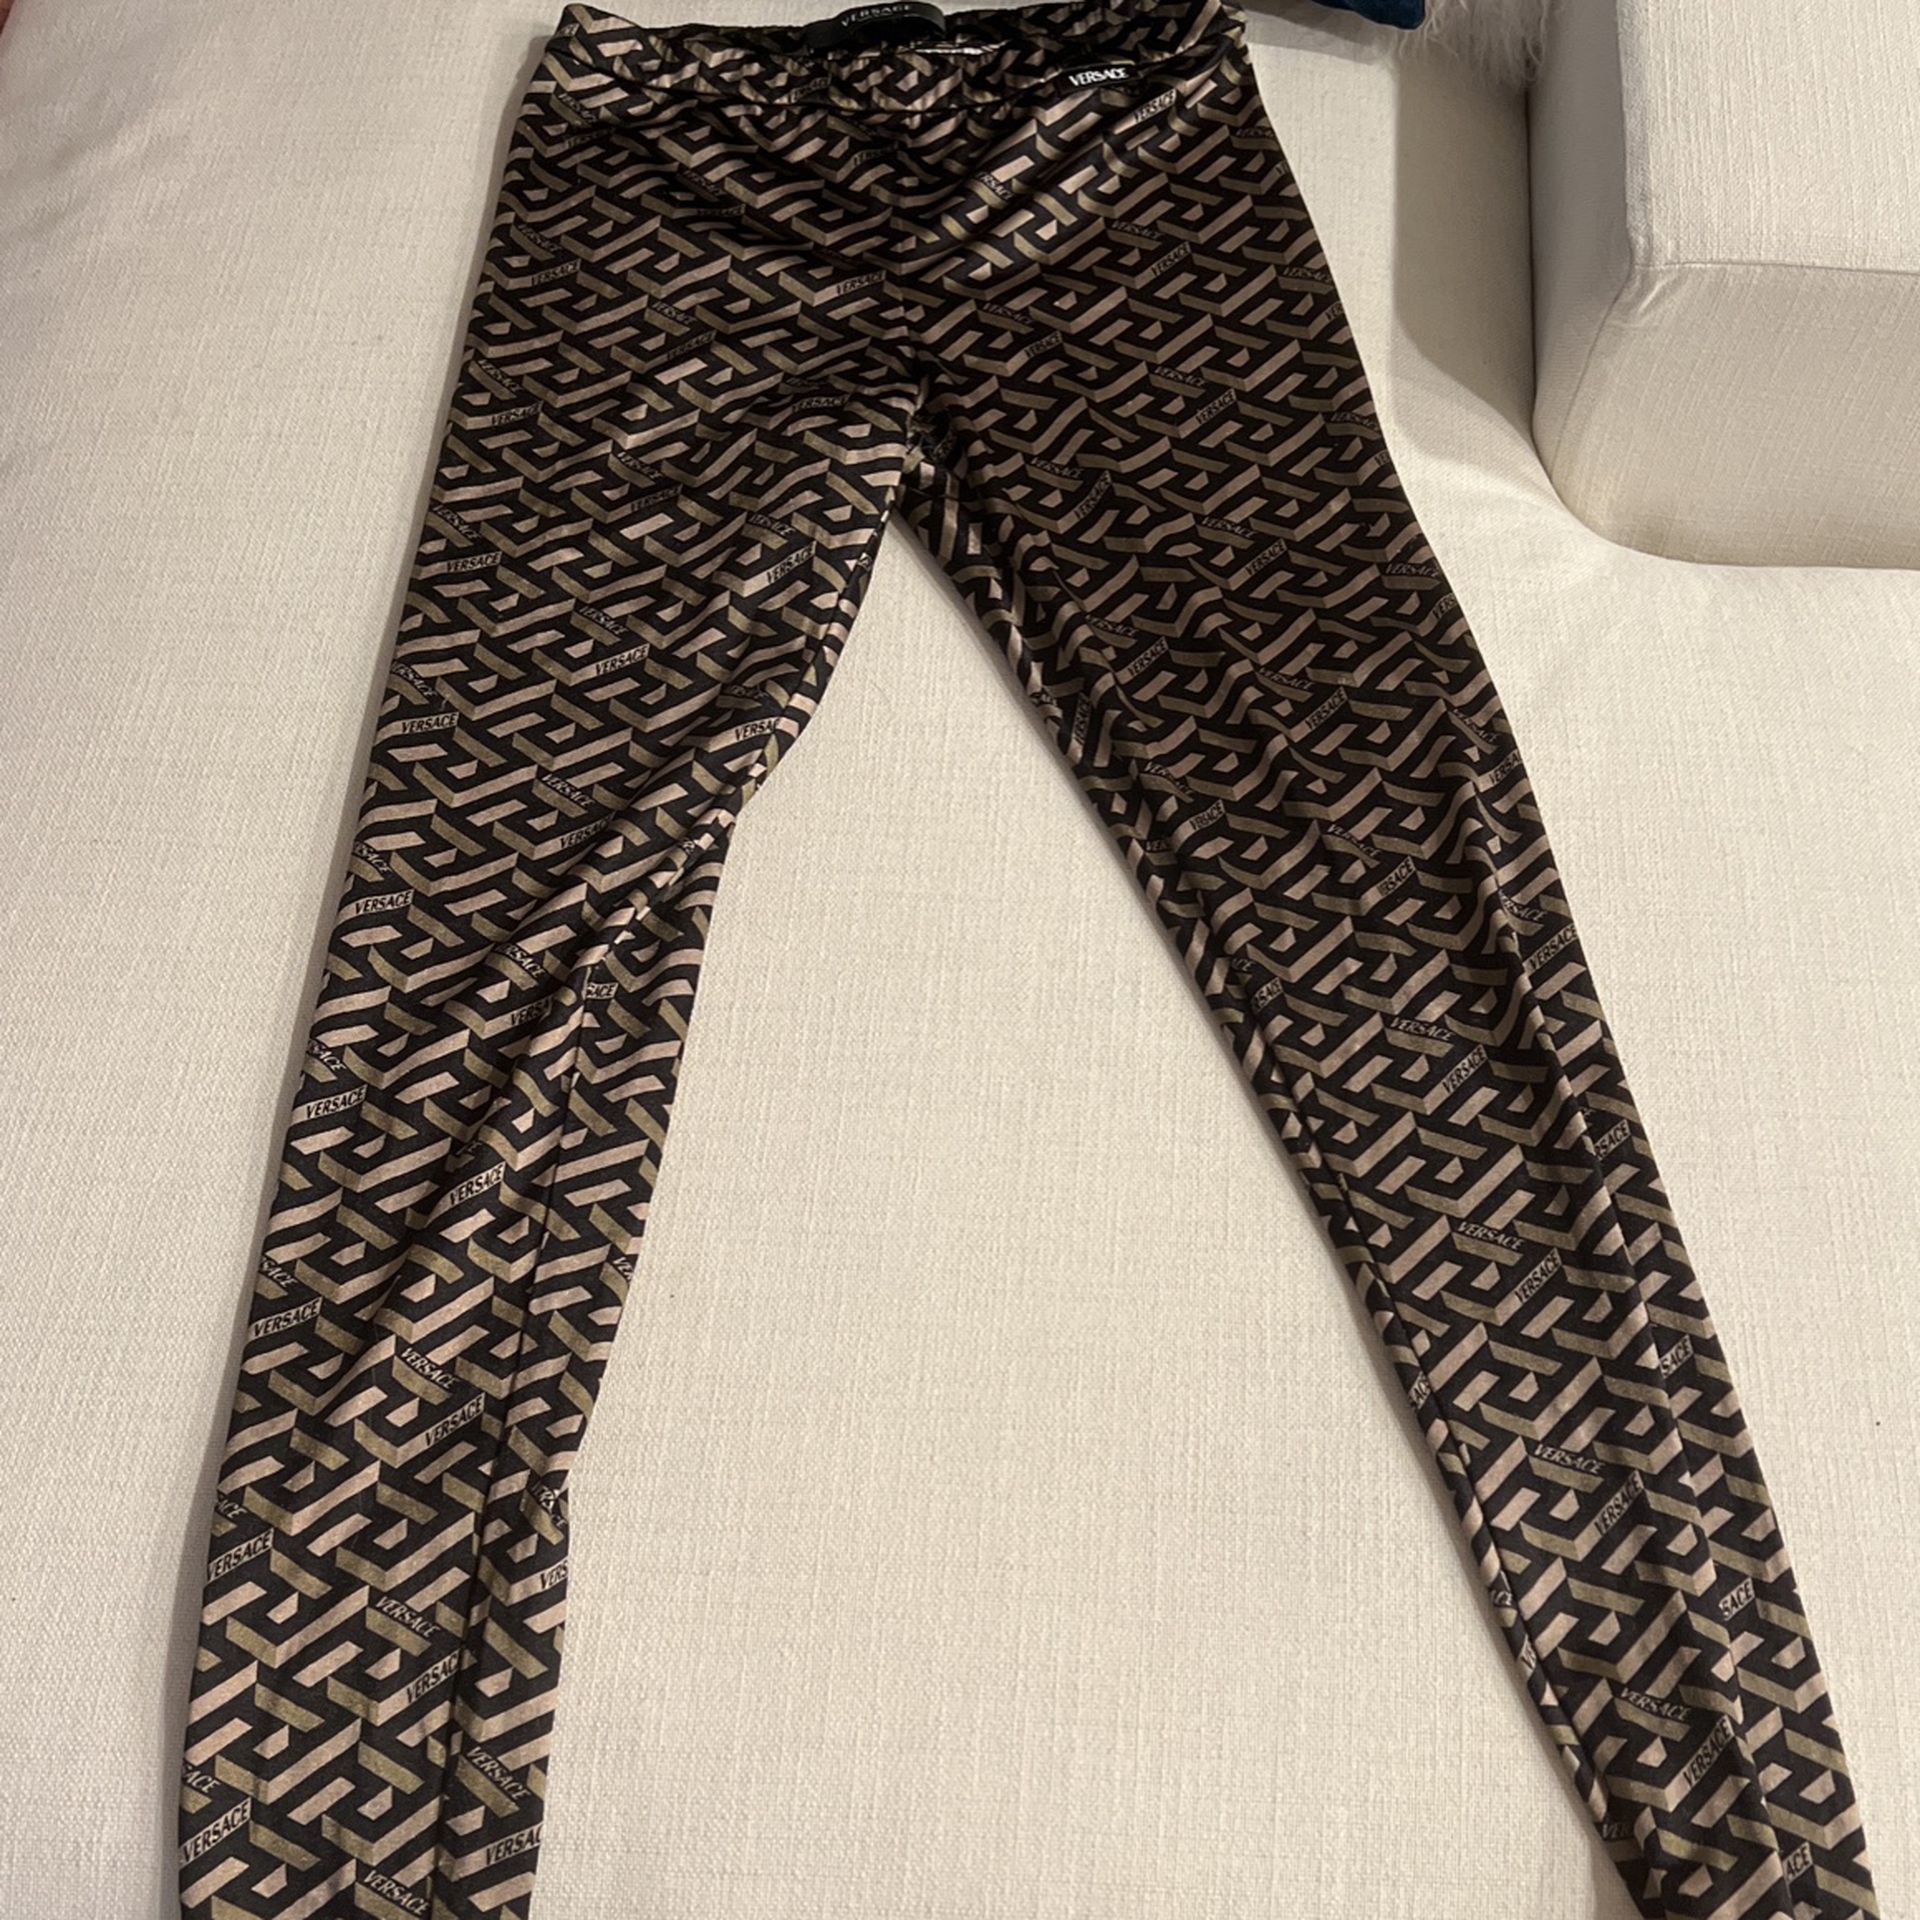 Versace Leggings Size Medium for Sale in Victorville, CA - OfferUp